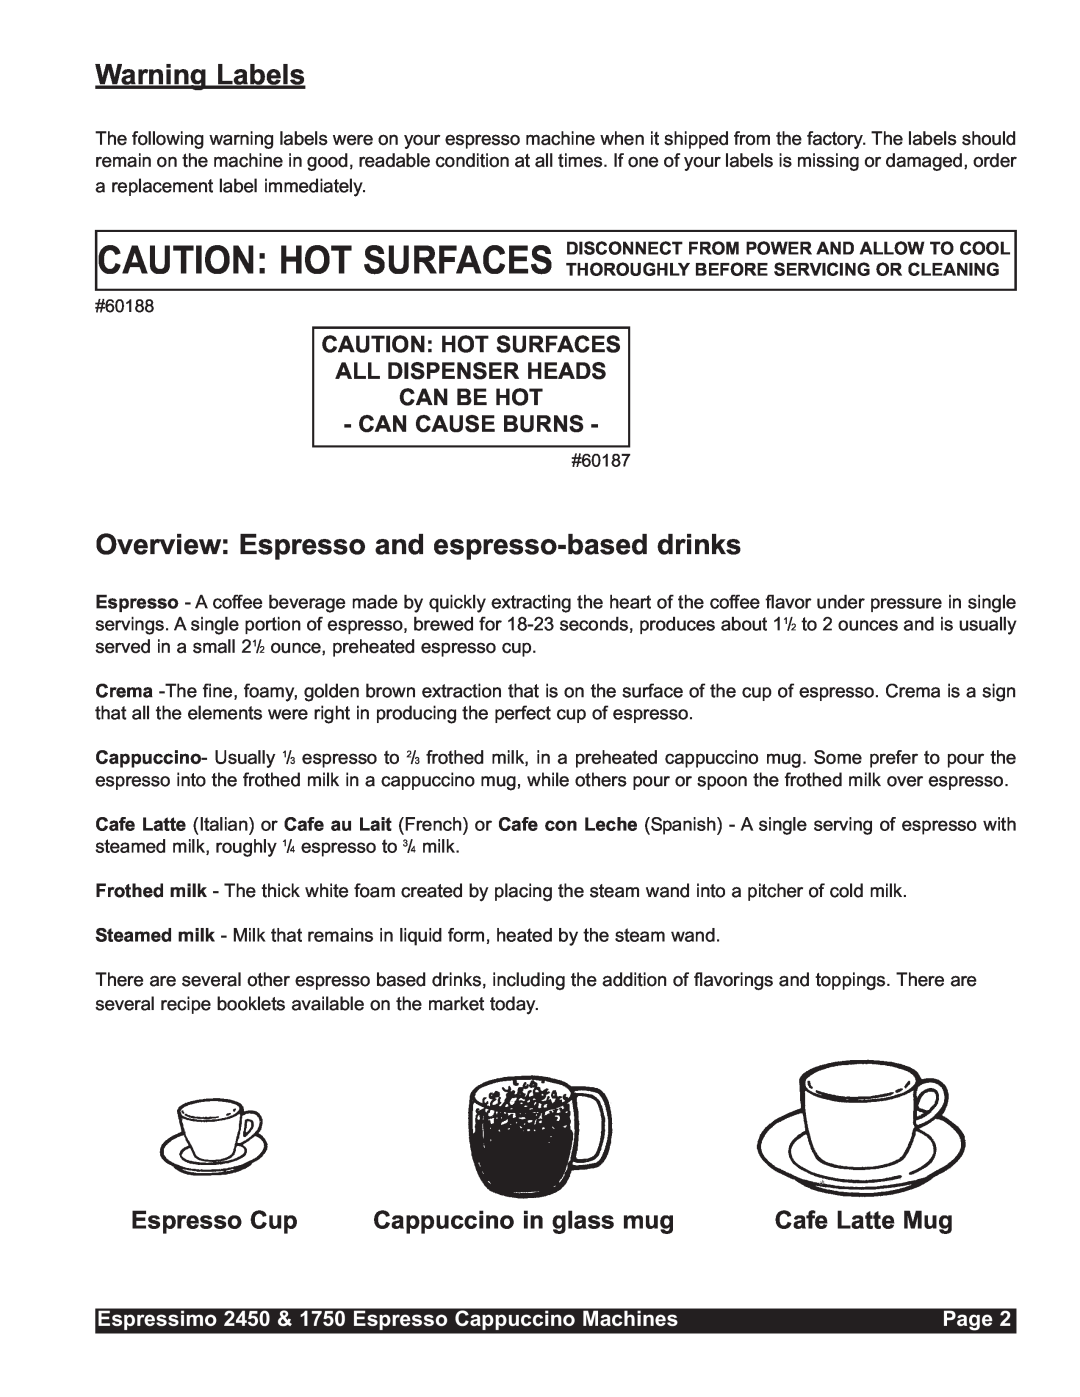 Grindmaster 1750, 2450 Warning Labels, Overview Espresso and espresso-baseddrinks, Can Cause Burns, Page, Espresso Cup 